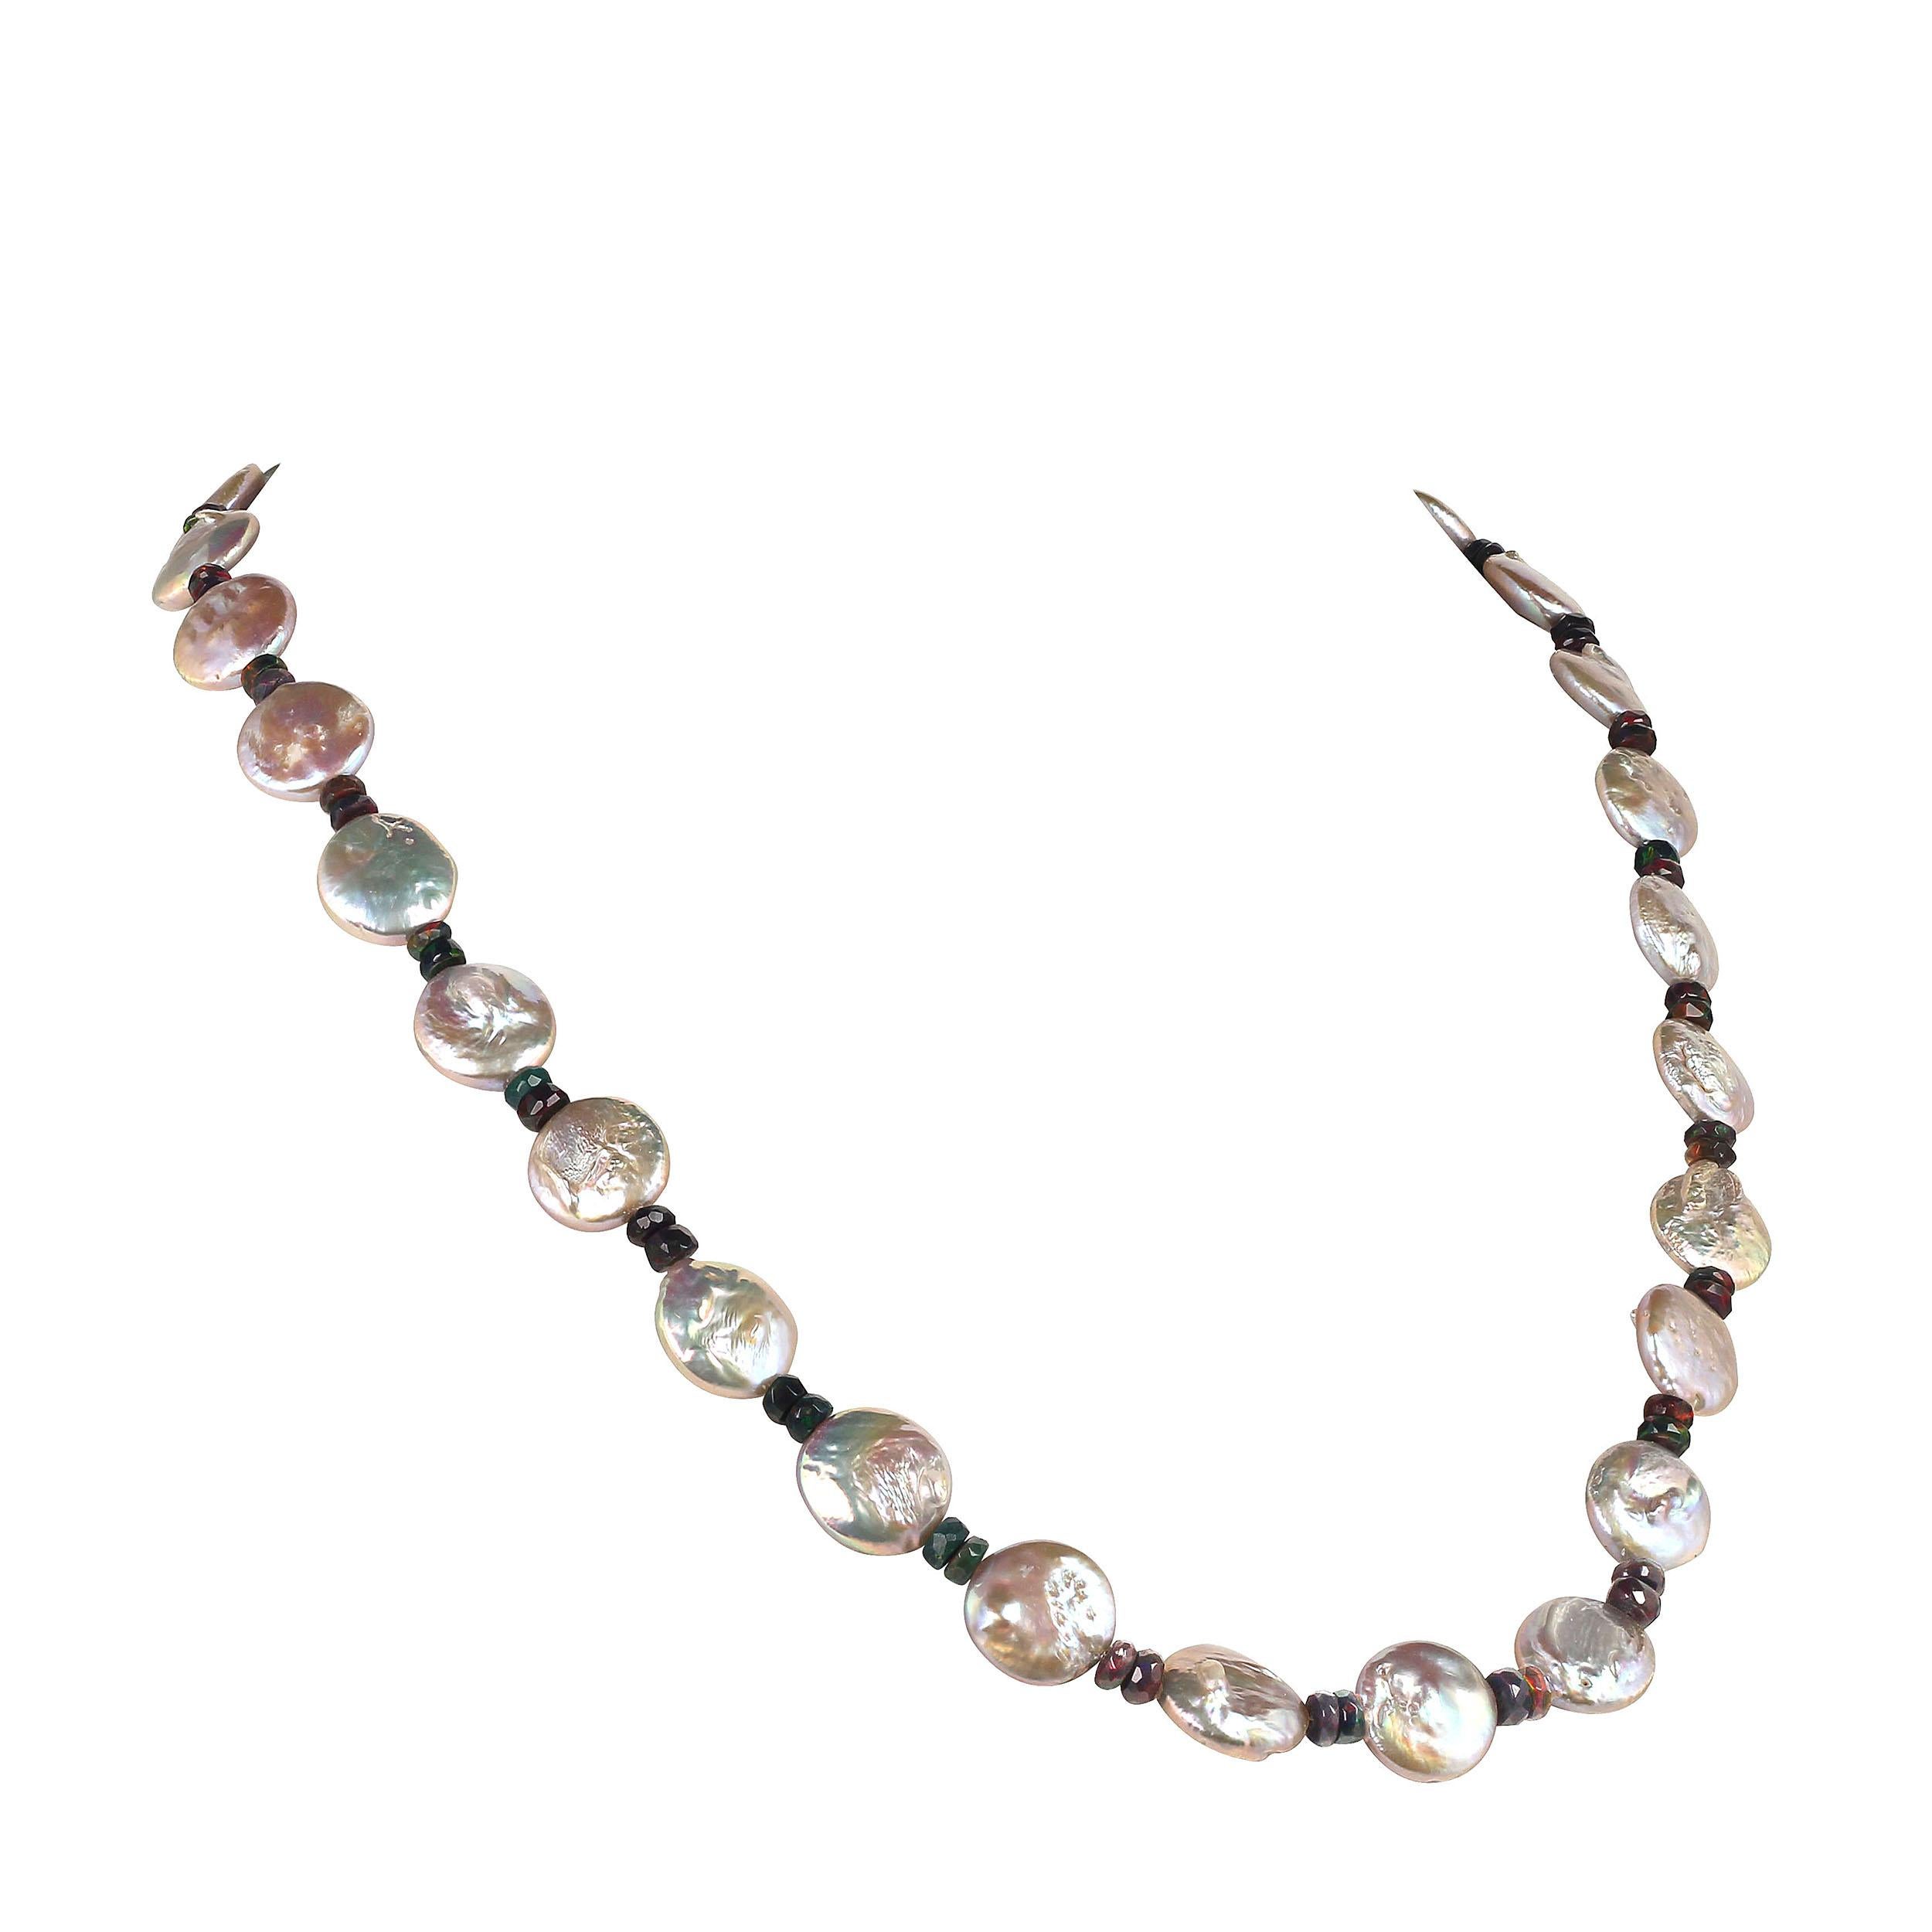 'Because you deserve to own beautiful Pearls'

Stunning iridescent silver Coin Pearls and flashing Black Opal faceted rondelles complement  each other in this lovely 22 inch necklace.  The Black Opals, 5MM, are various shades of black, red, and